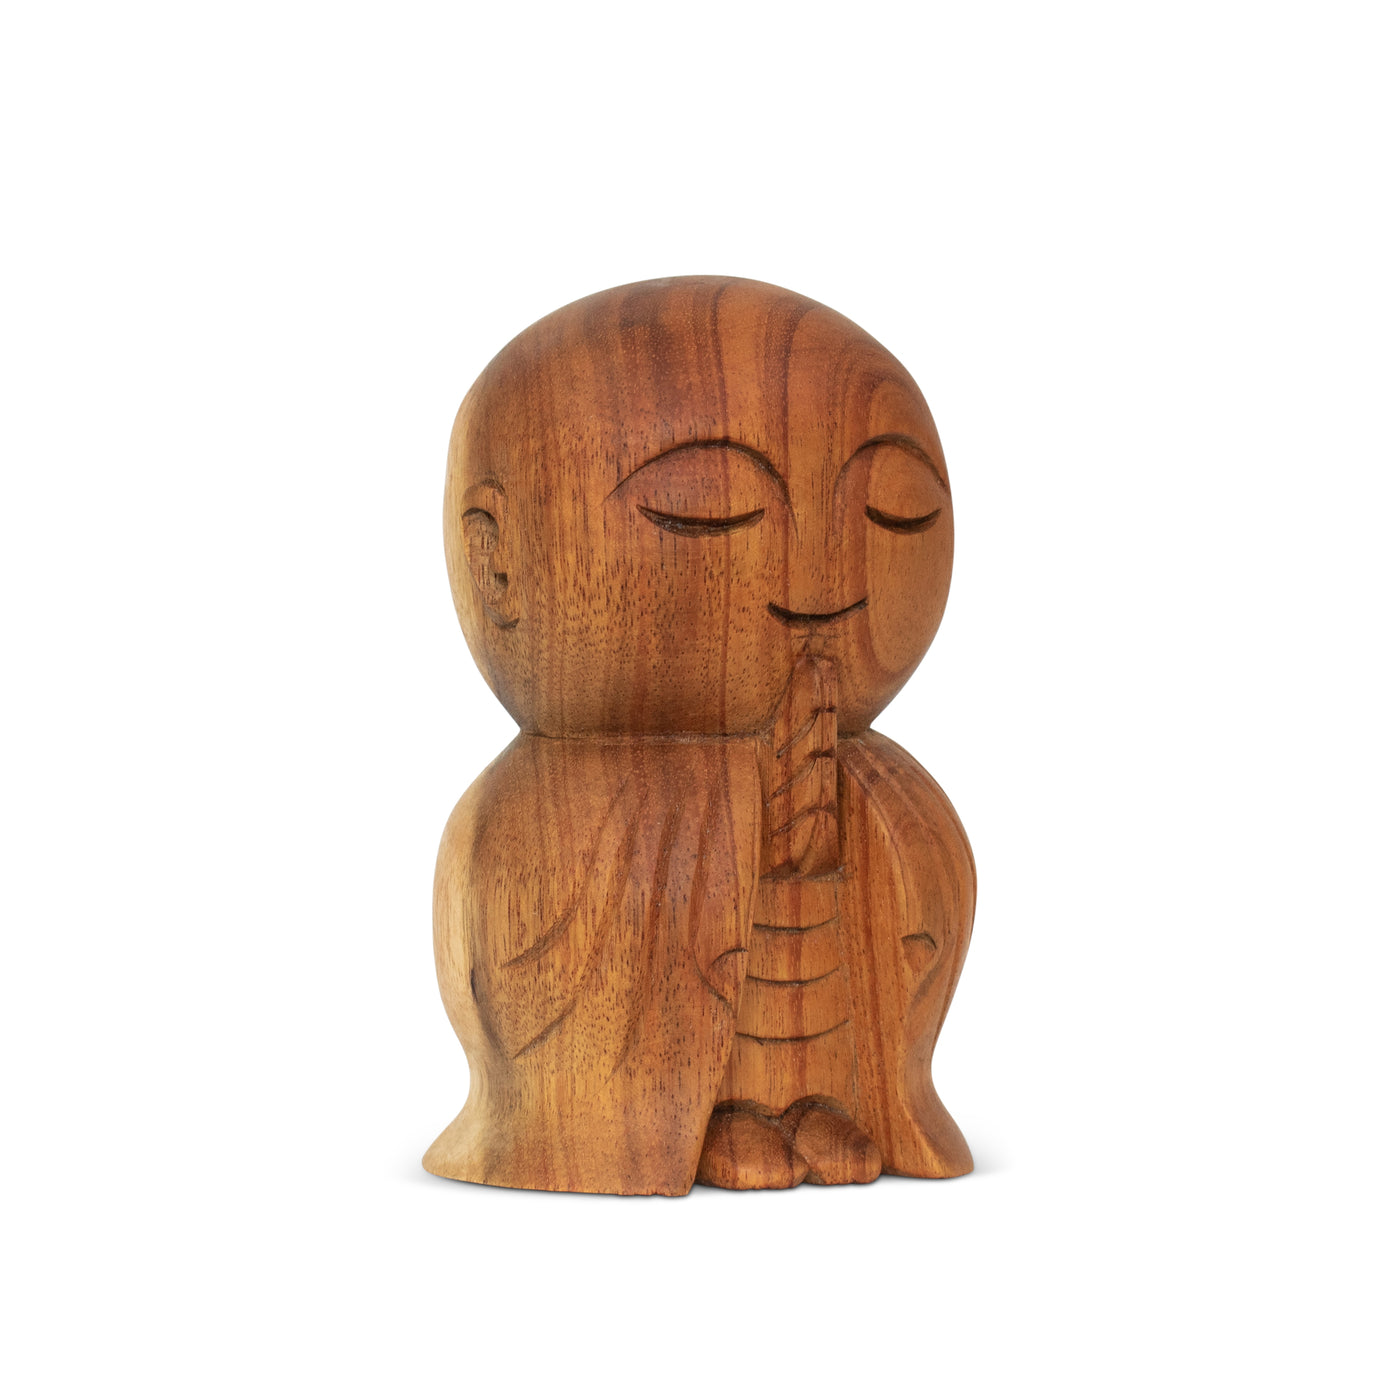 Wooden Hand Carved Praying Buddha Monk Figurine Statue Sculpture Handmade Gift Home Decor Accent Handcrafted Decoration